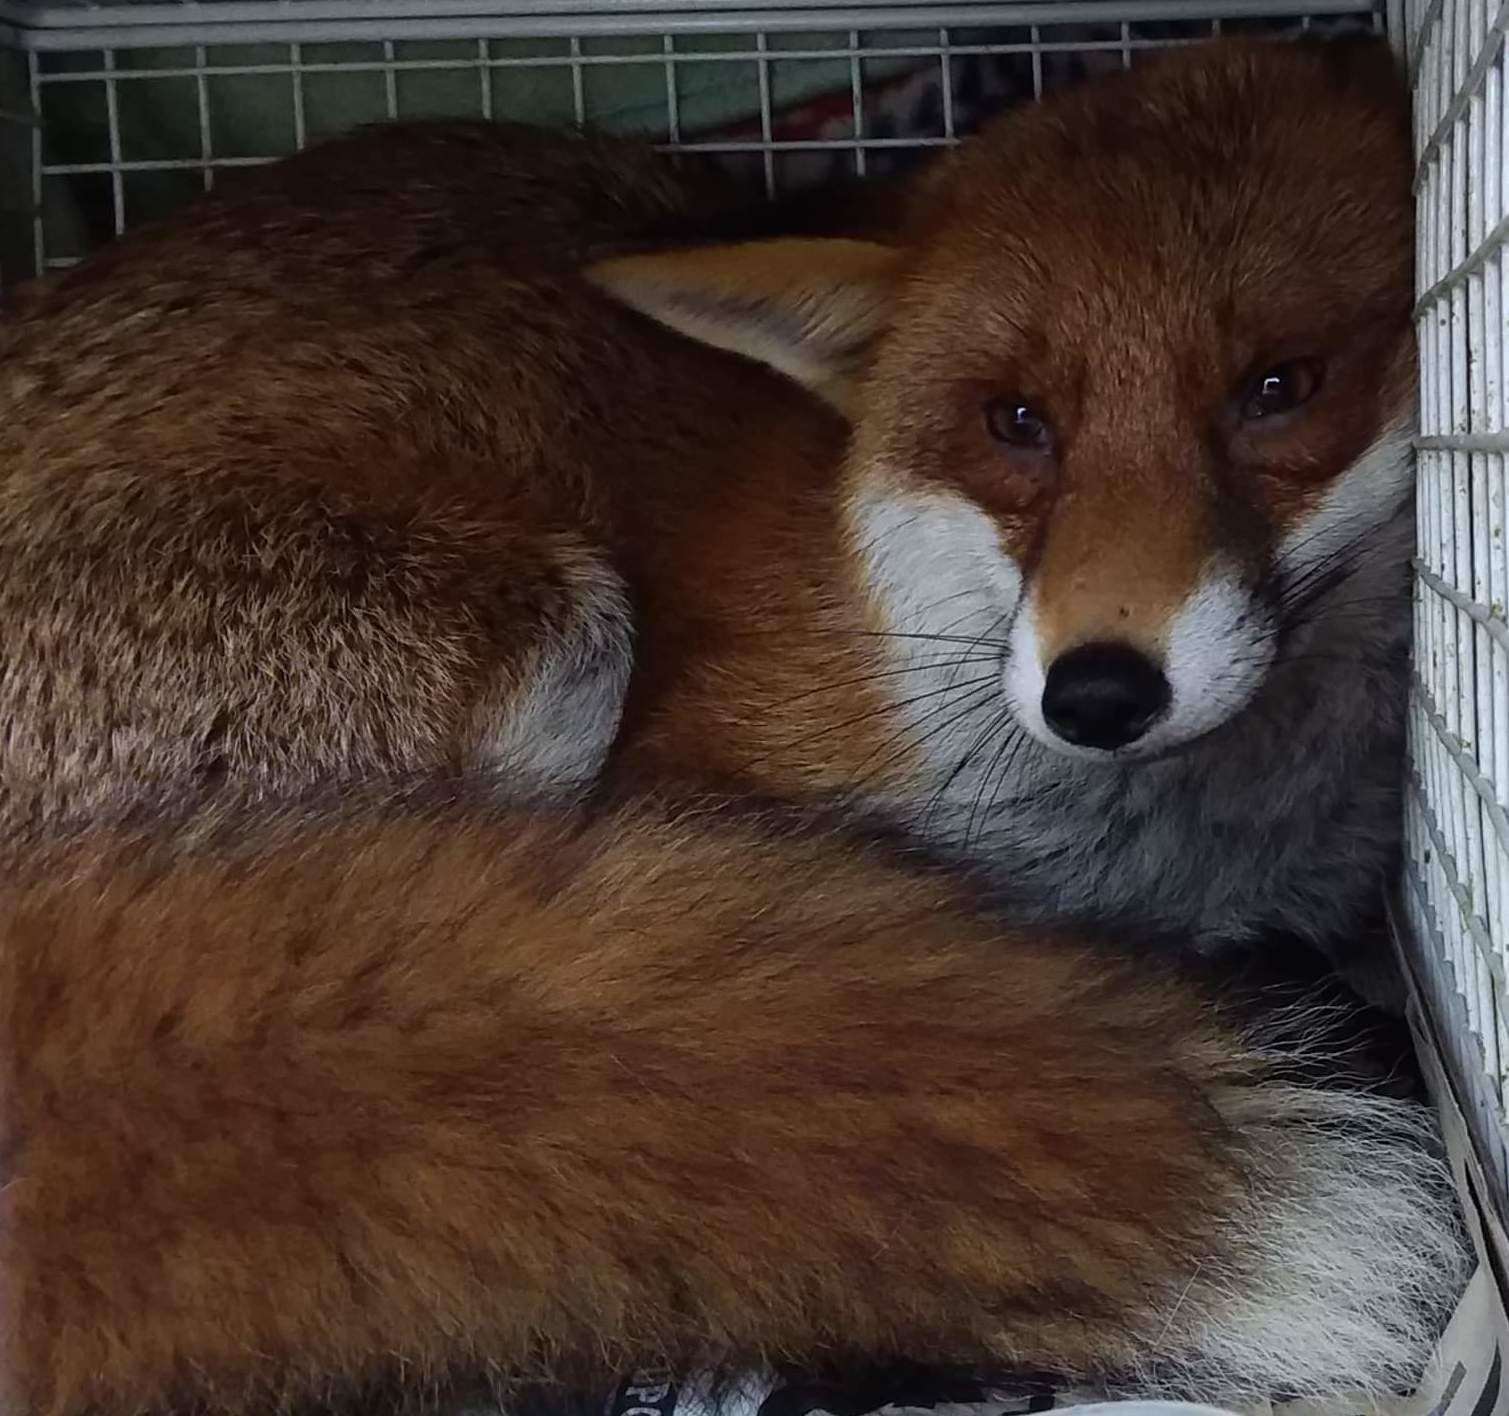 The fox was rescued by Nicola Honey